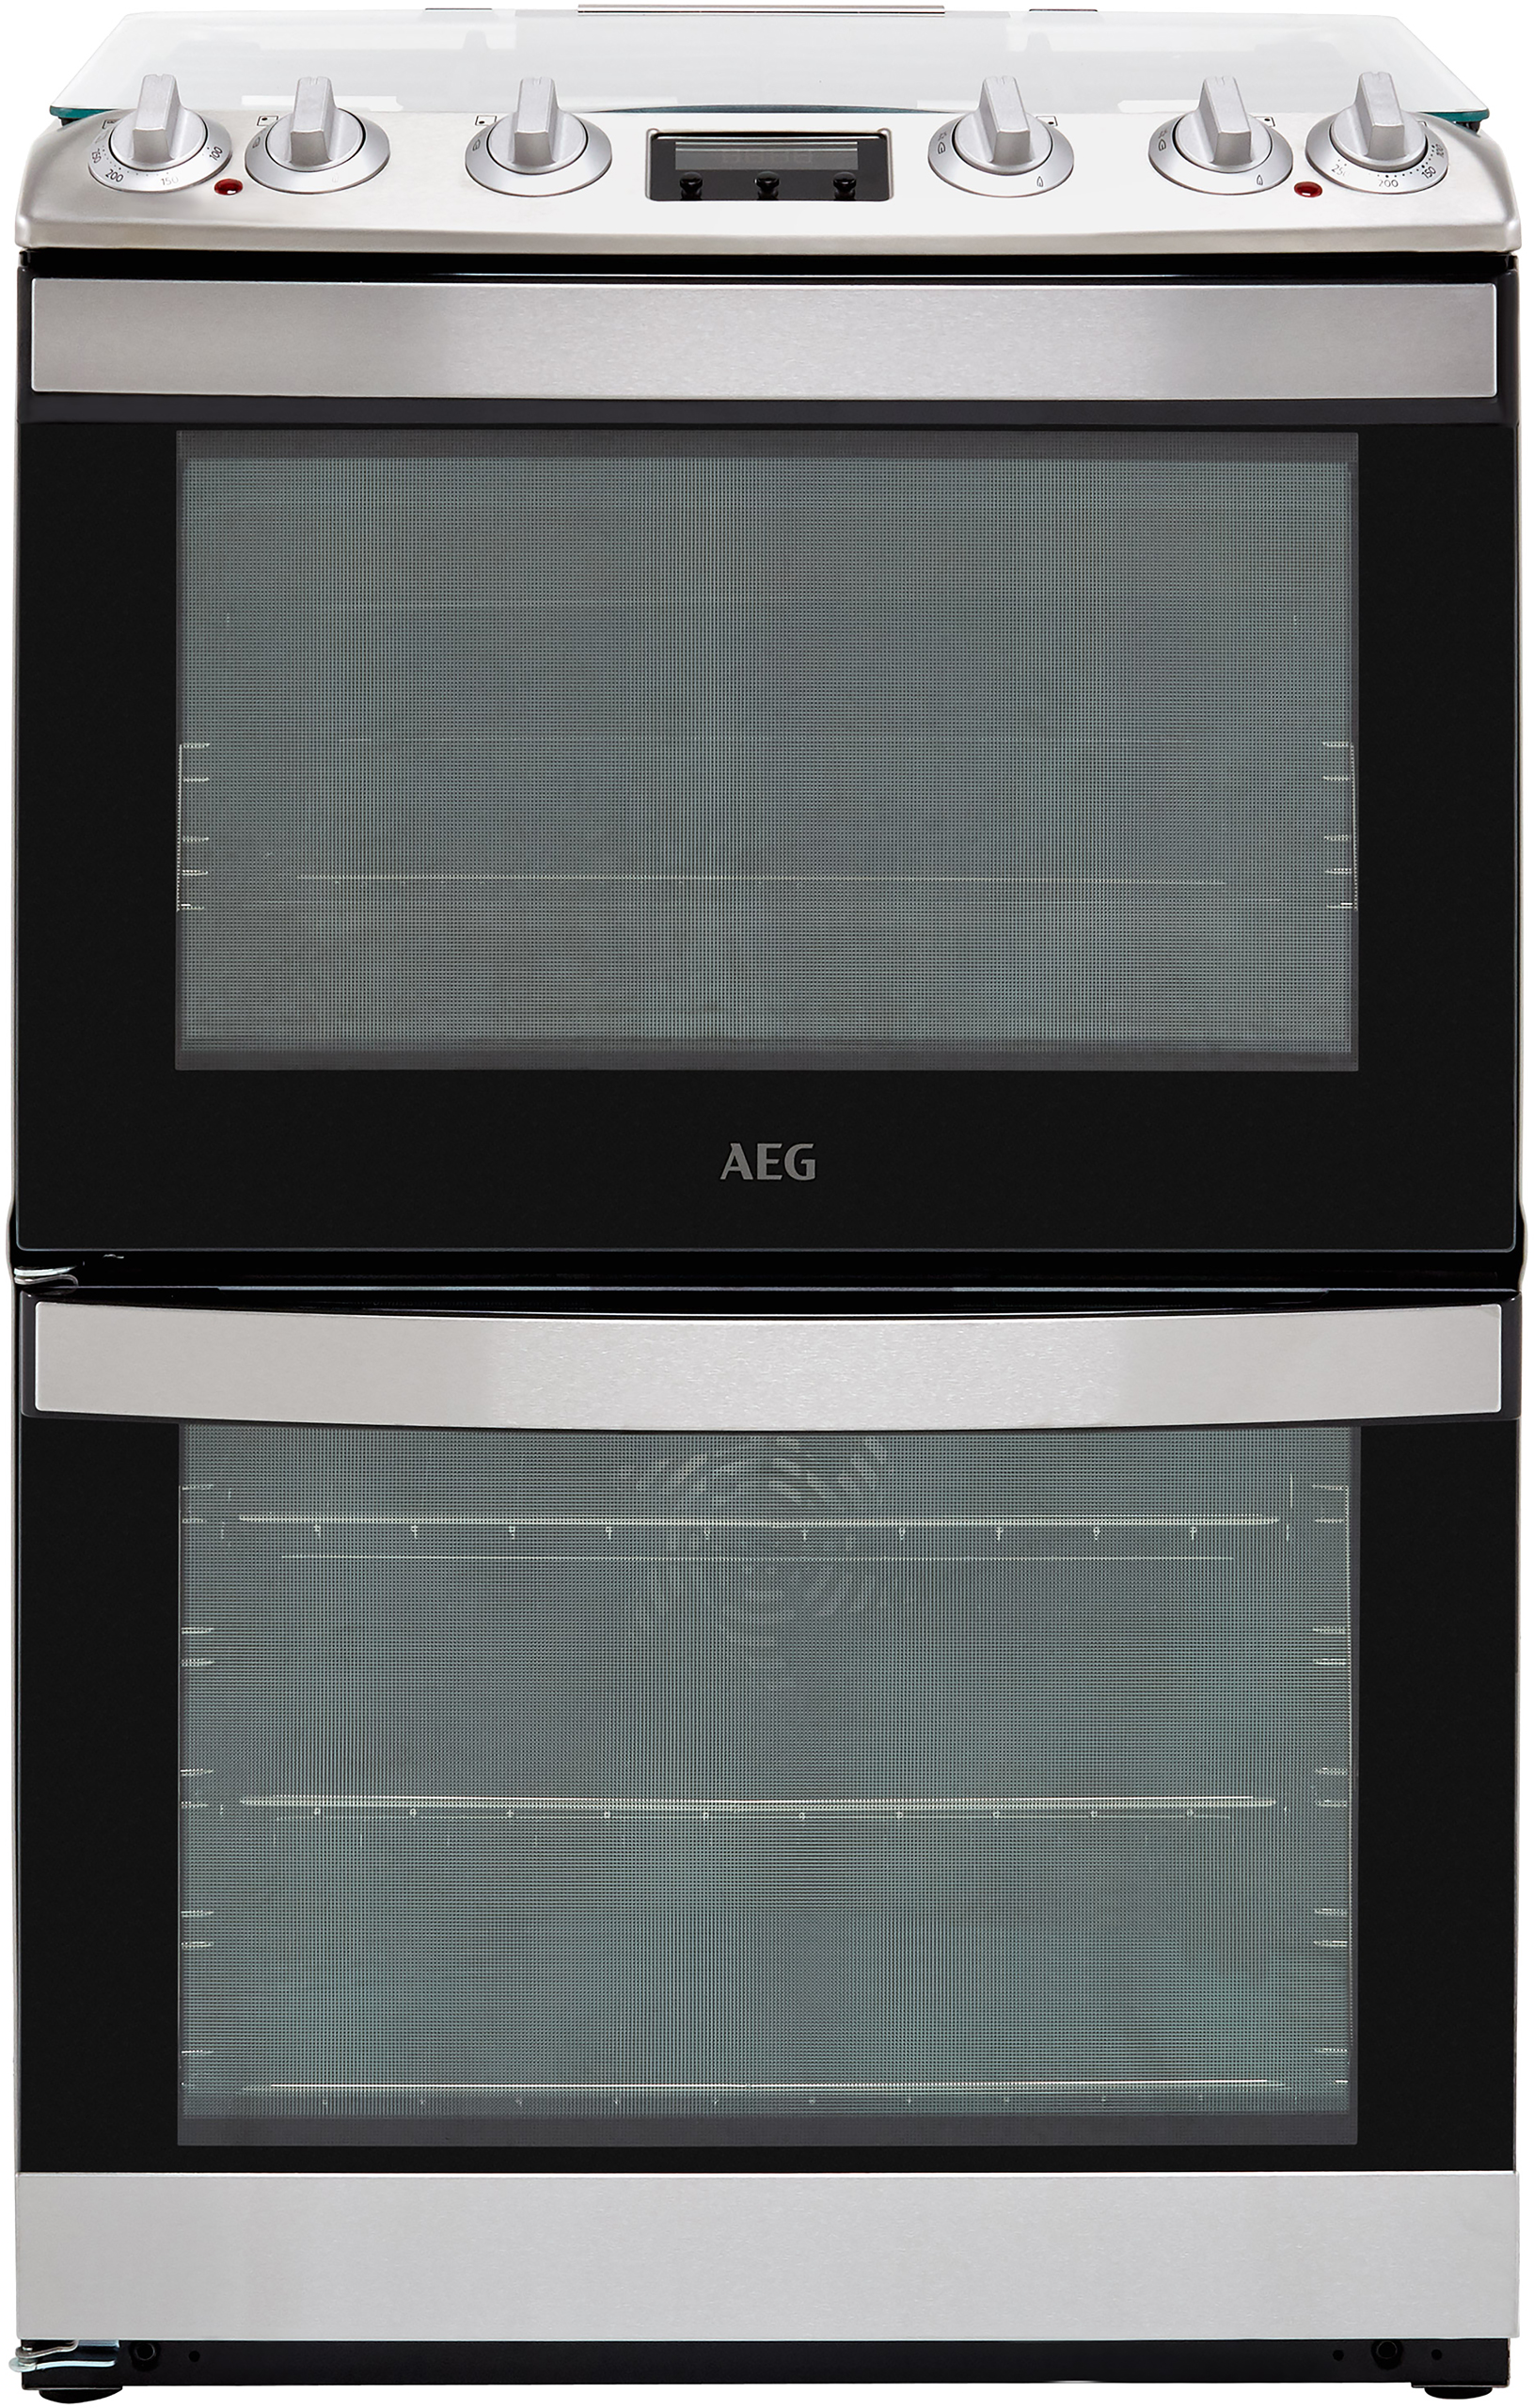 AEG CKB6540ACM 60cm Freestanding Dual Fuel Cooker - Stainless Steel - A/A Rated, Stainless Steel